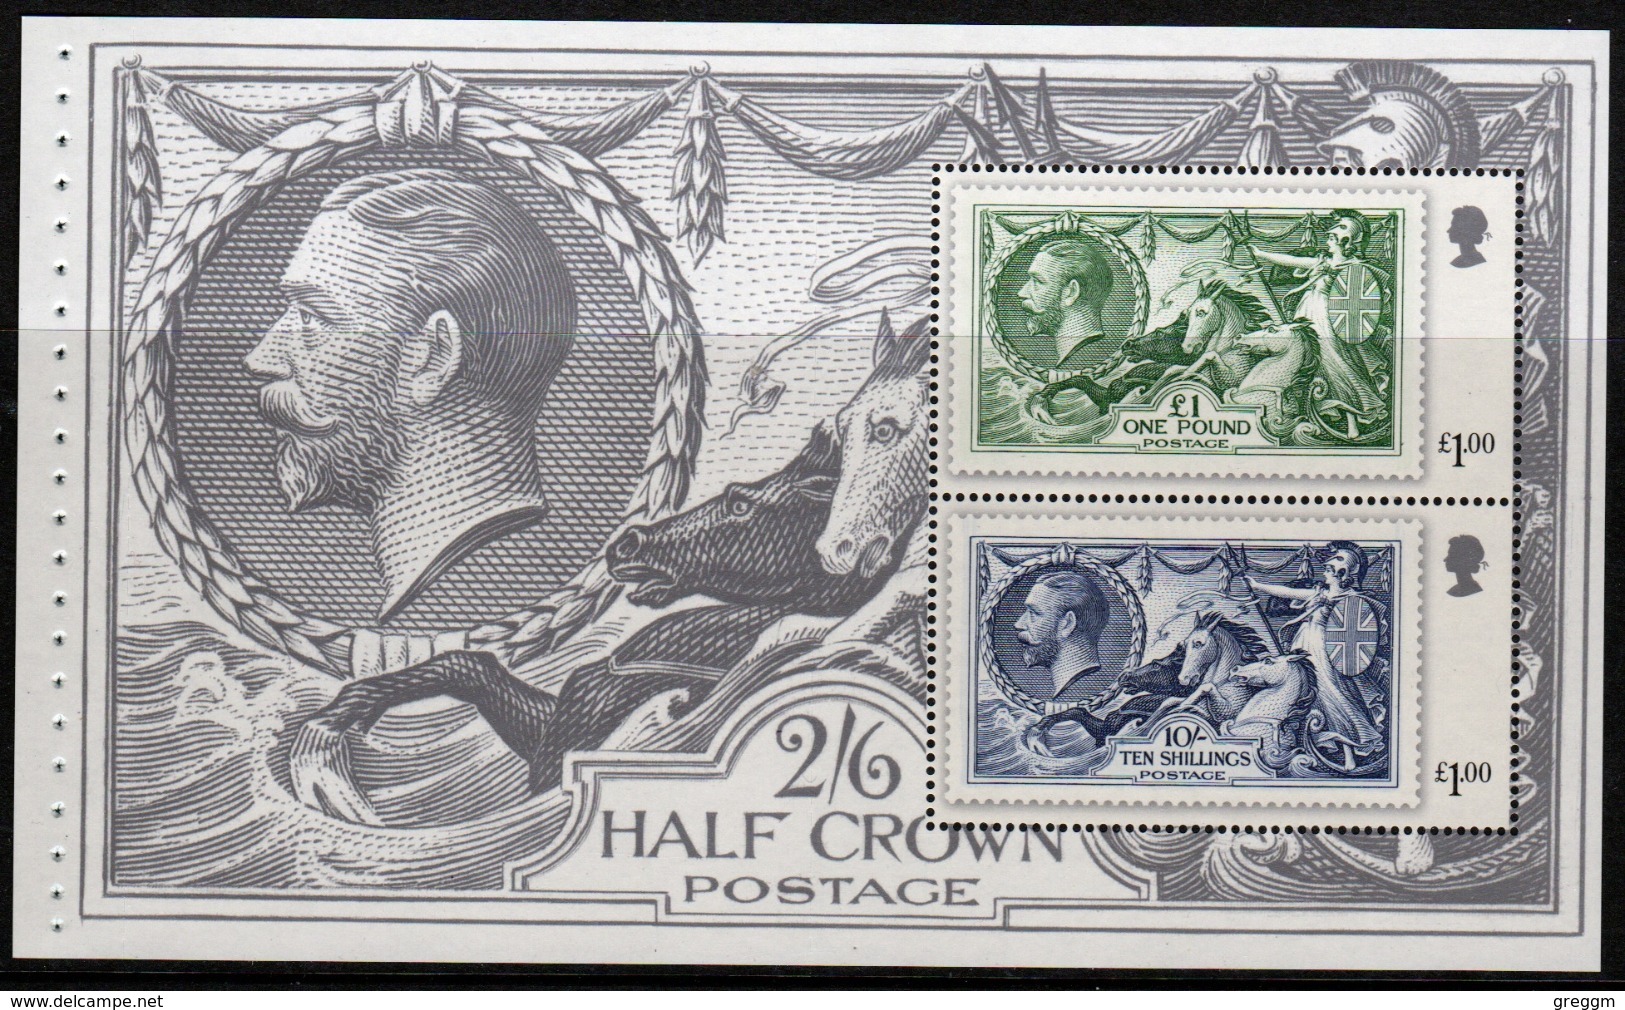 GB Prestige Booklet Pane Taken From Centenary Of George V Accession Issued On 8th May 2010. - Libretti